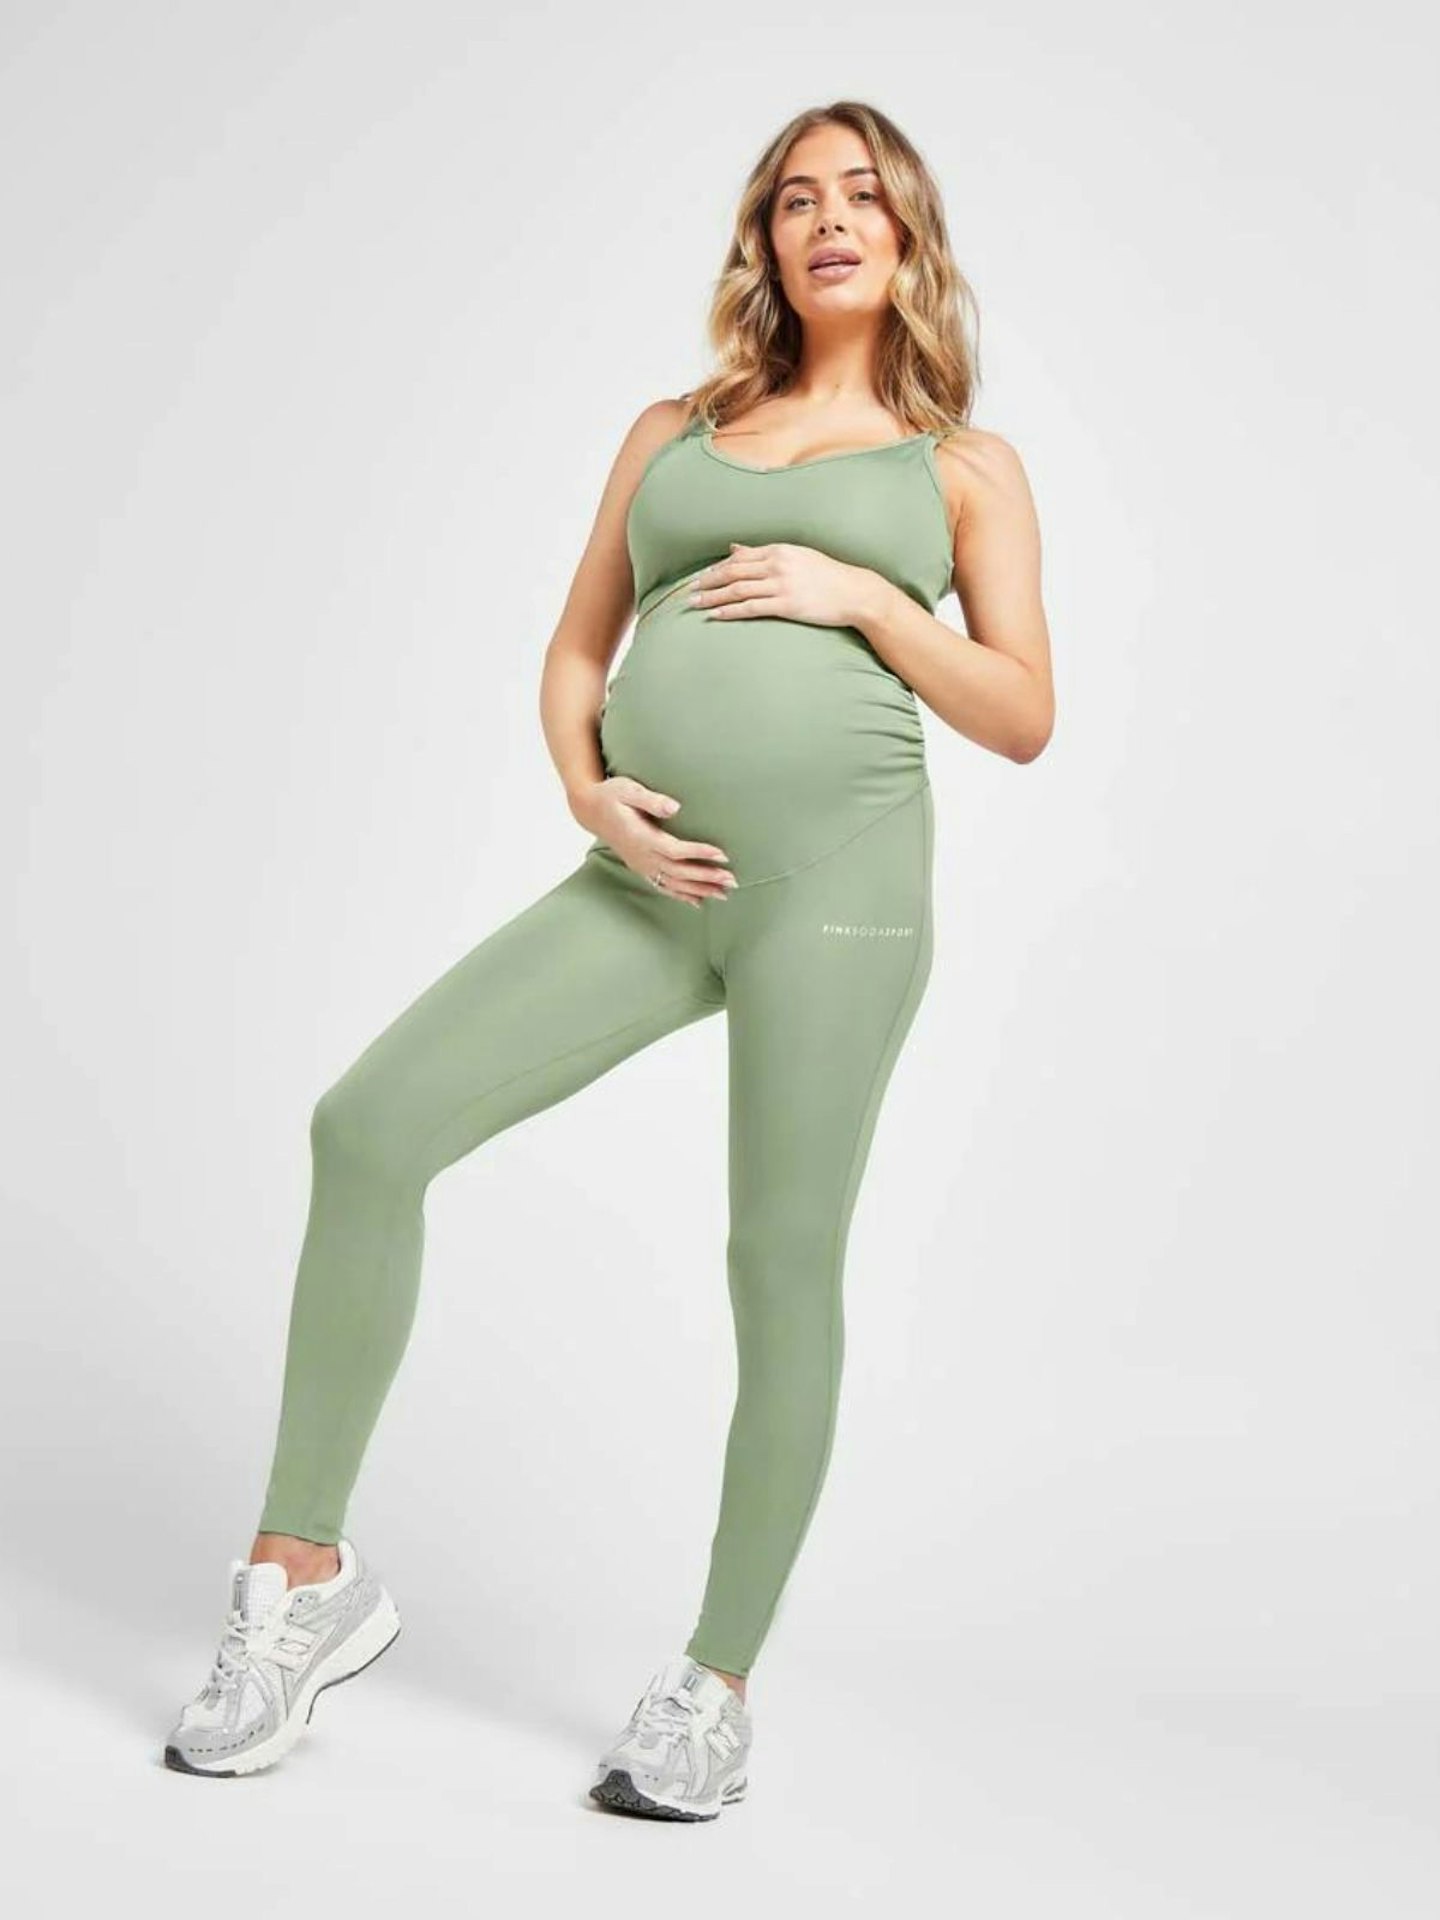 Where To Find Maternity Leggings For Workouts (Exercise On Any Budget)